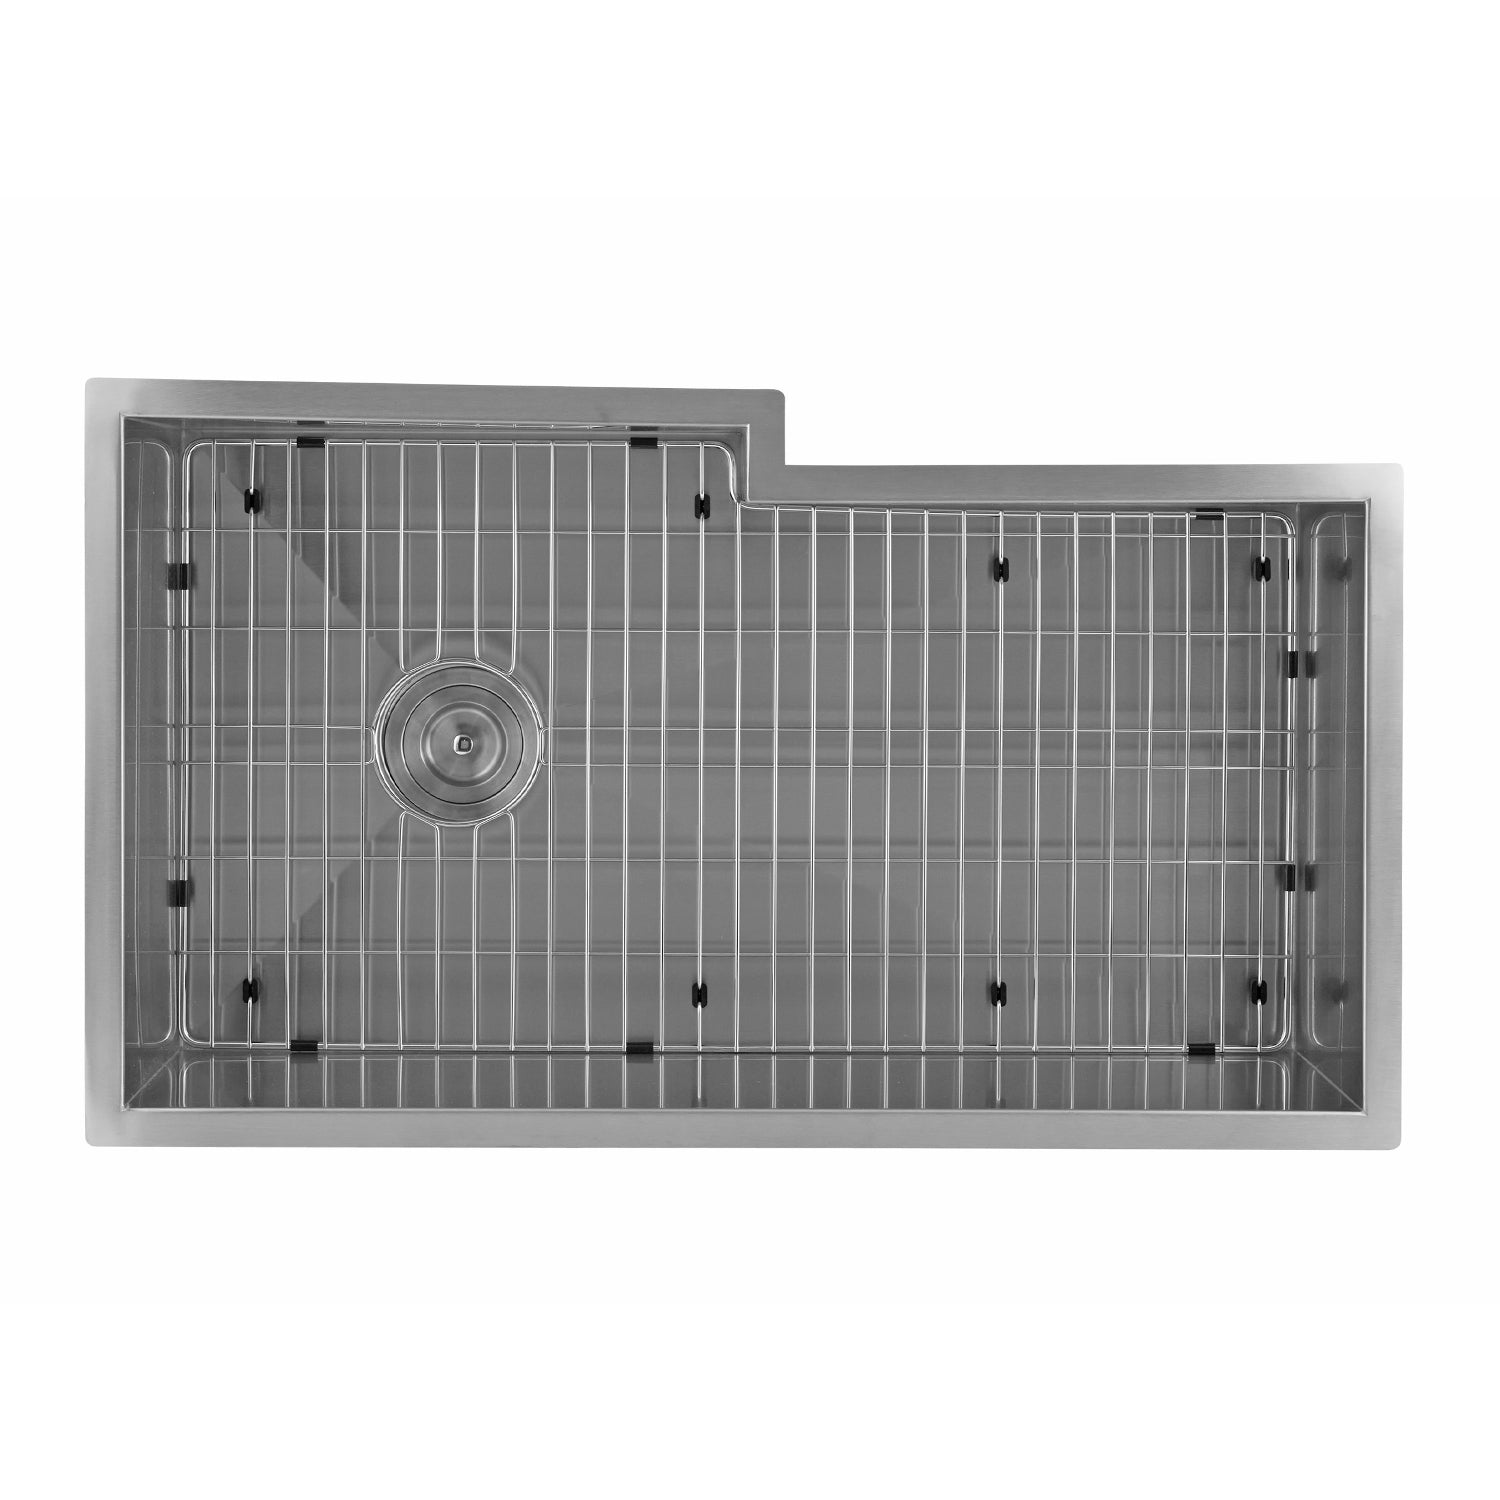 DAX Grid for Kitchen Sink, Stainless Steel Body, Chrome Finish, Compatible with DAX-SQ-3420F, 31-3/4 x 17-3/4 Inches (GRID-SQ3420F)